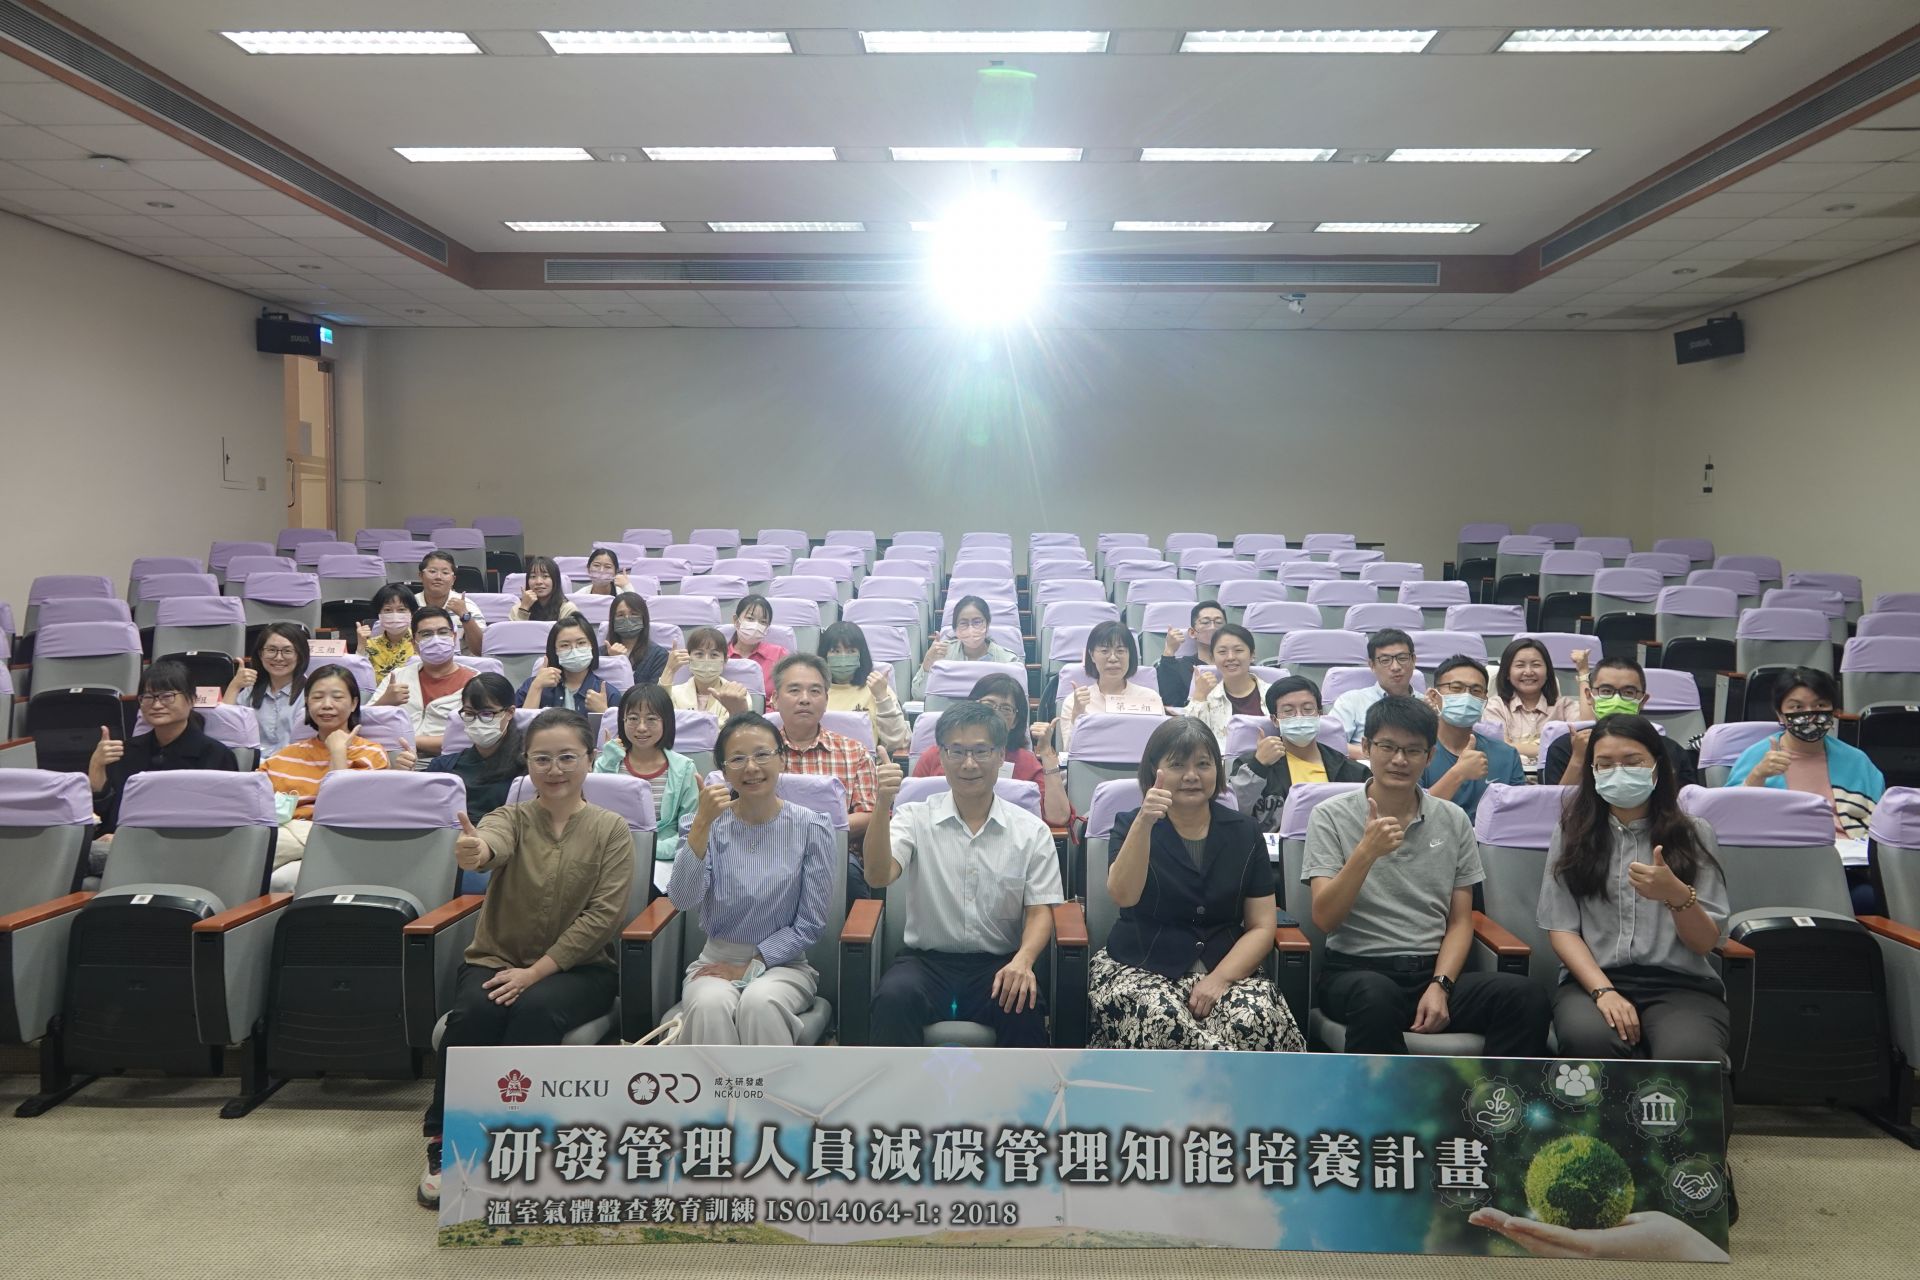 NCKU's First University-wide Carbon Reduction Management Training for Research and Development Staff Concludes Successfully